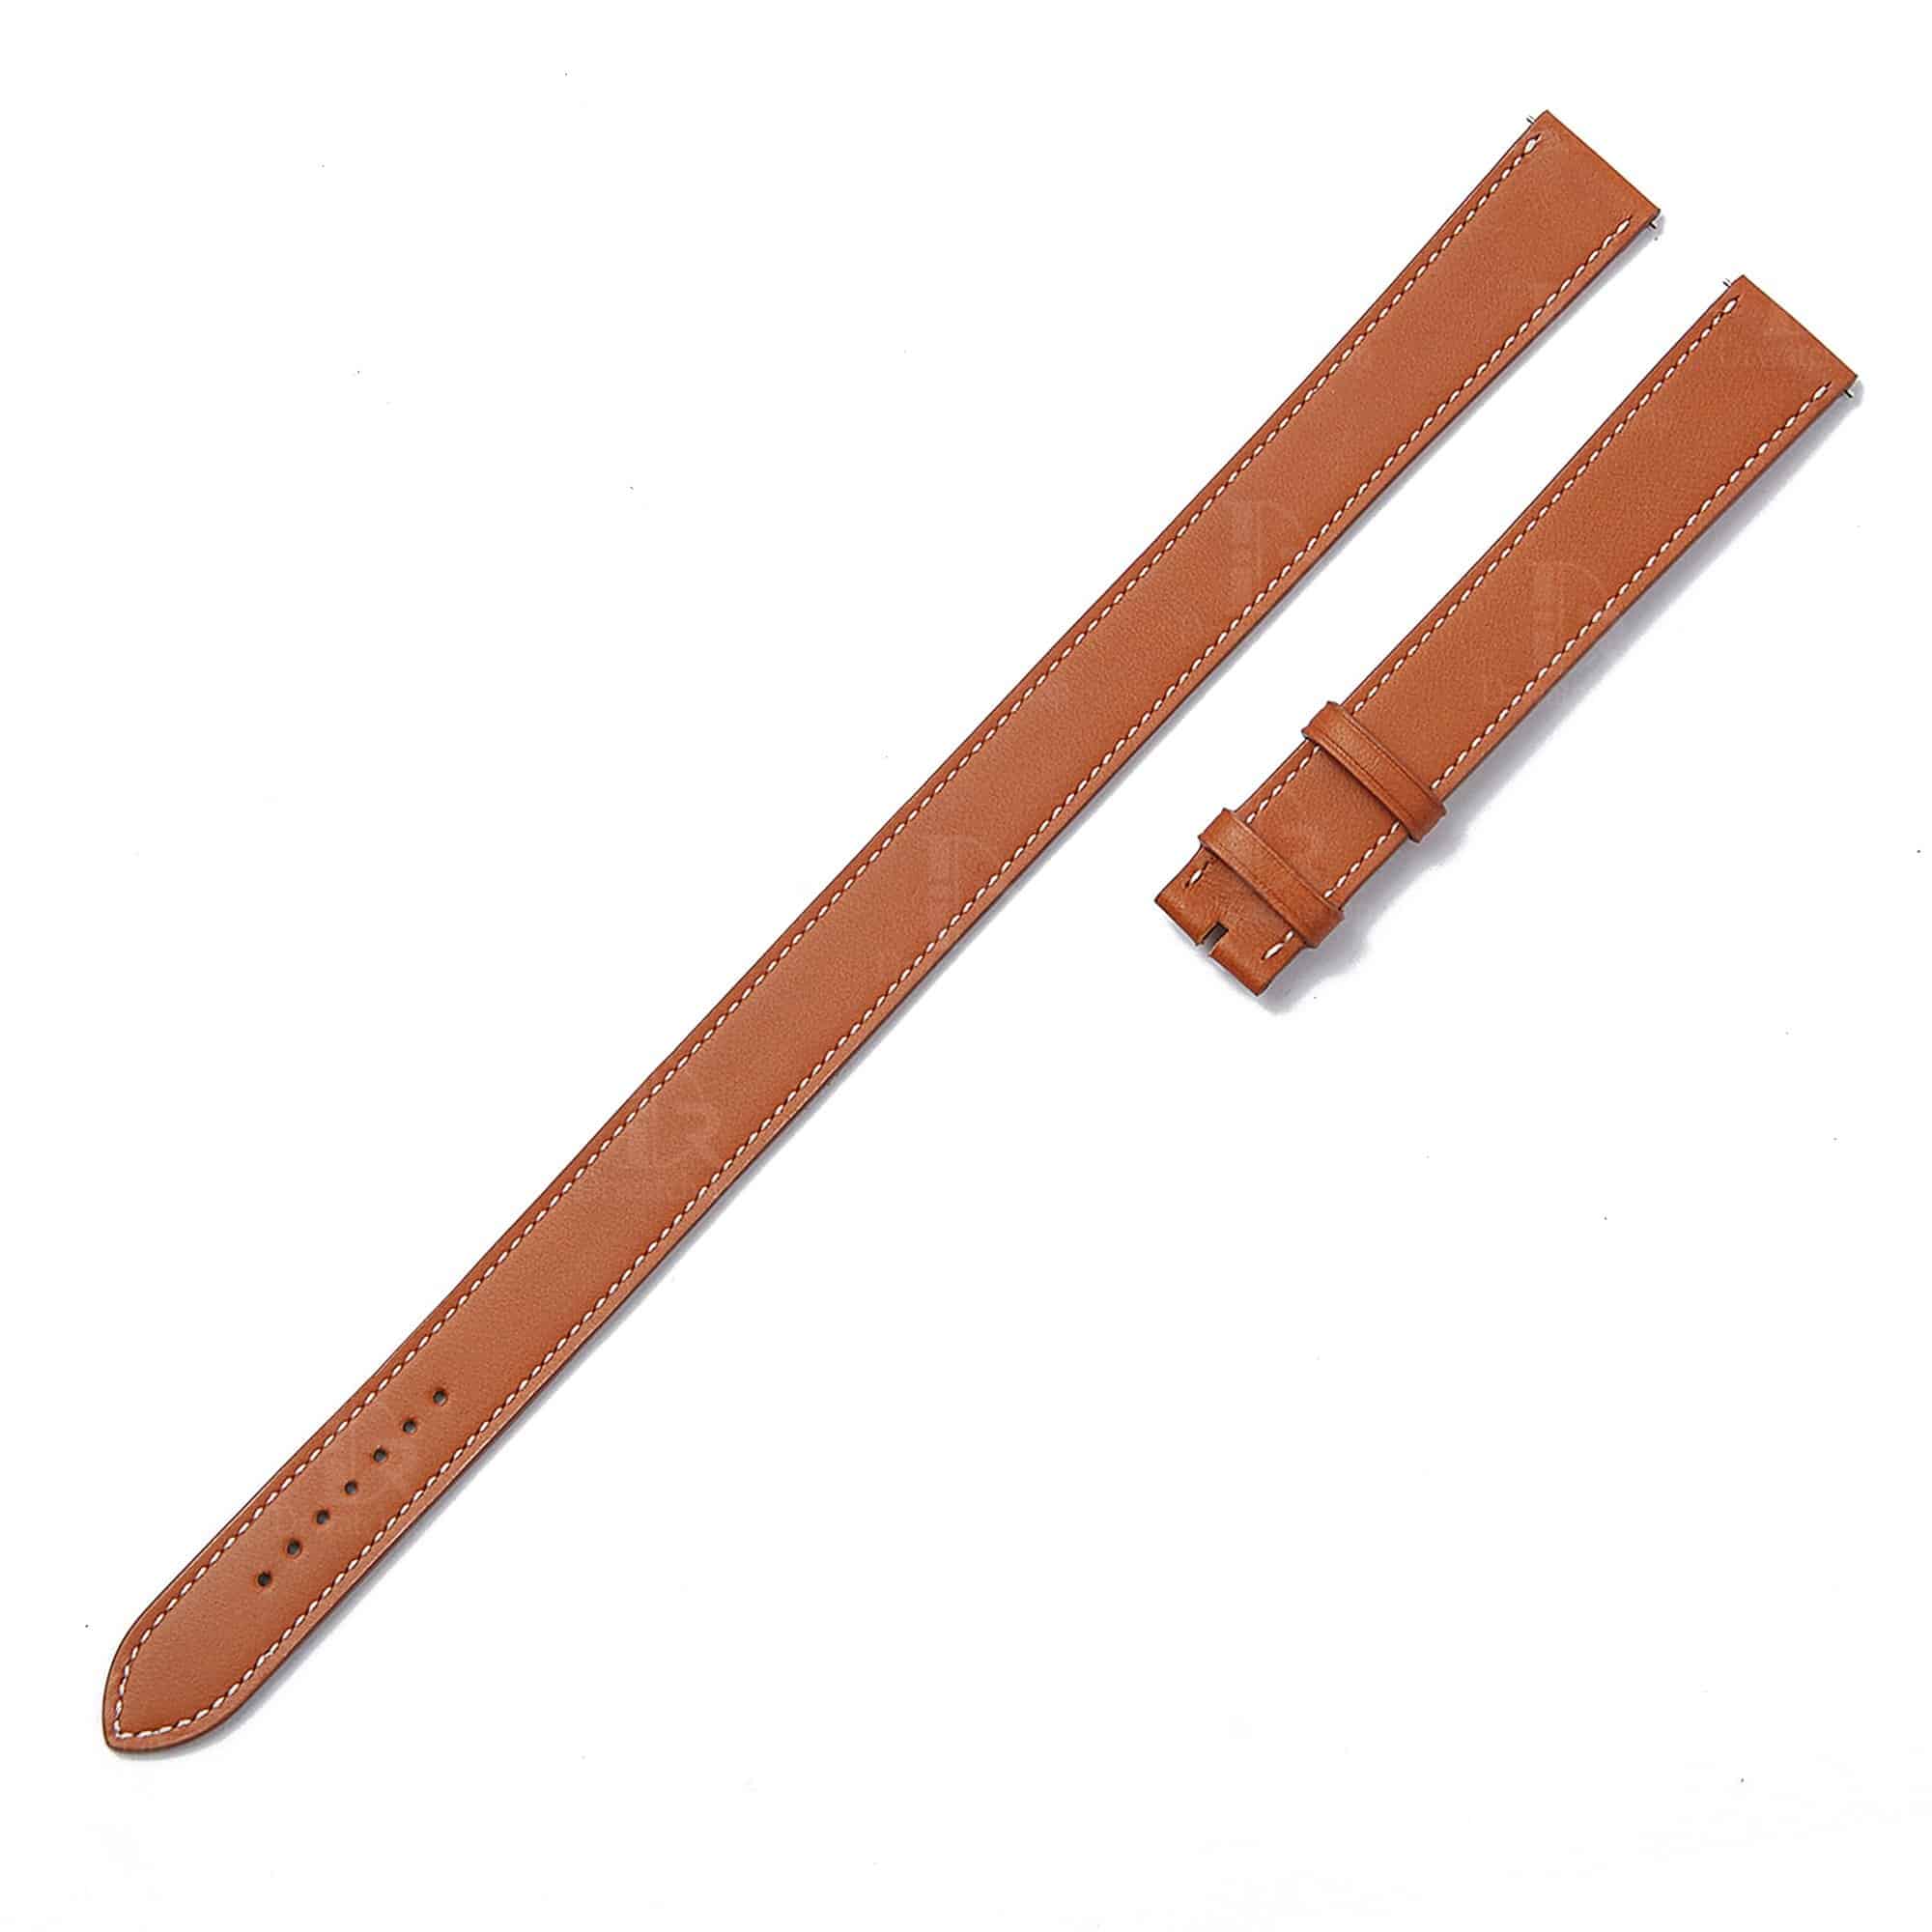 Custom Premium high-end quality calfskin replacement brown leather Hermes watch band and Hermes strap for Hermes Cape cod, Heure H, Arceau watches for sale - double wrap and double tour sport watch band online